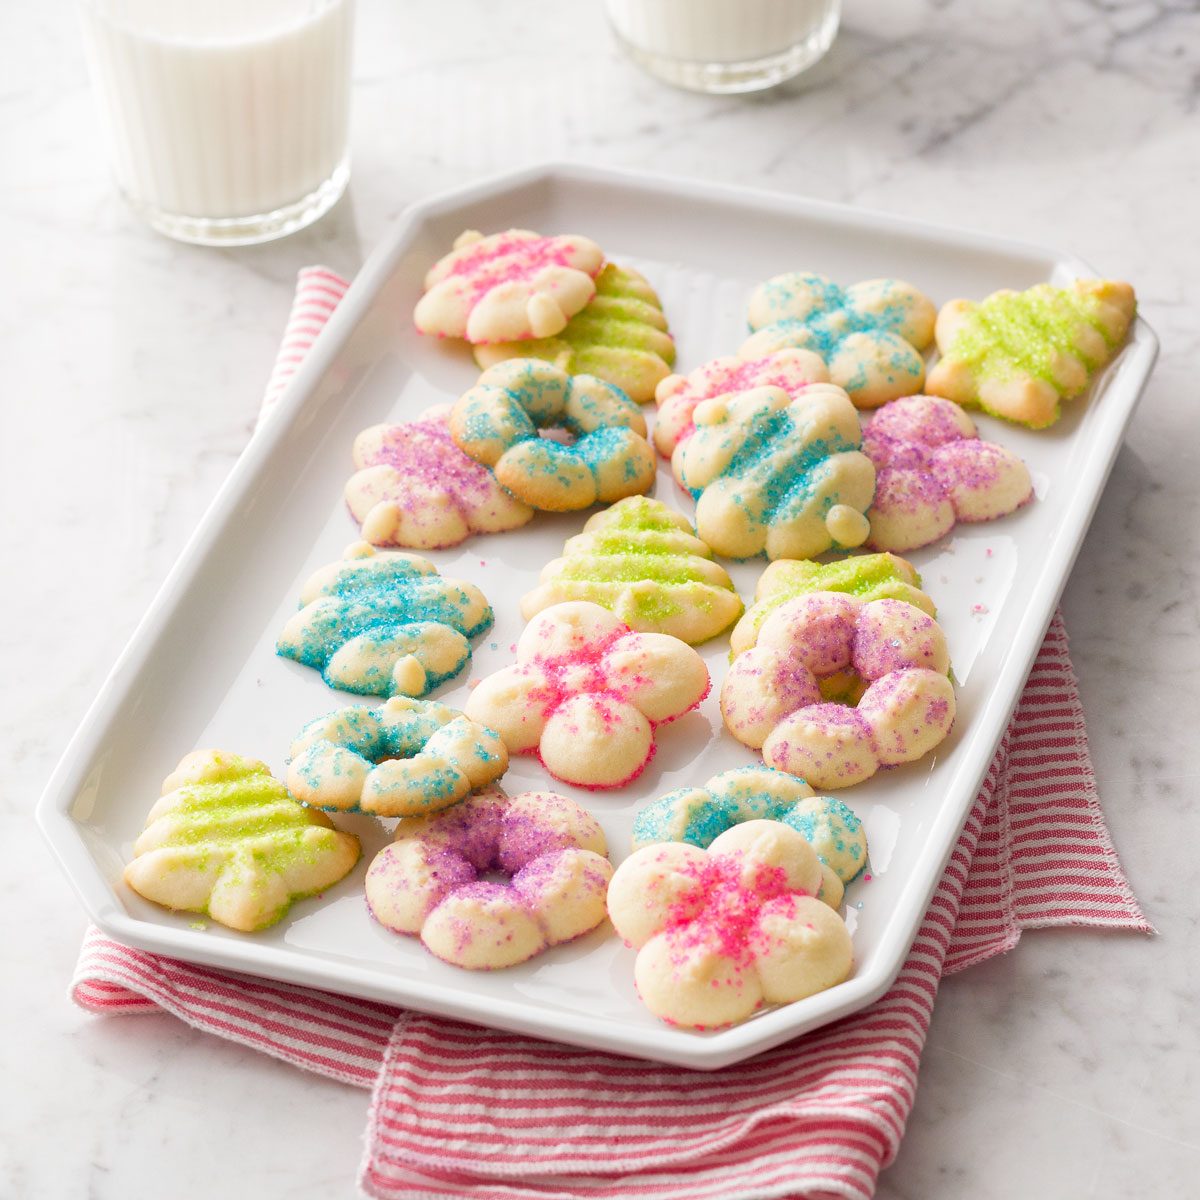 Buttery Spritz Cookies in White Tray on Marble Kitchen Top